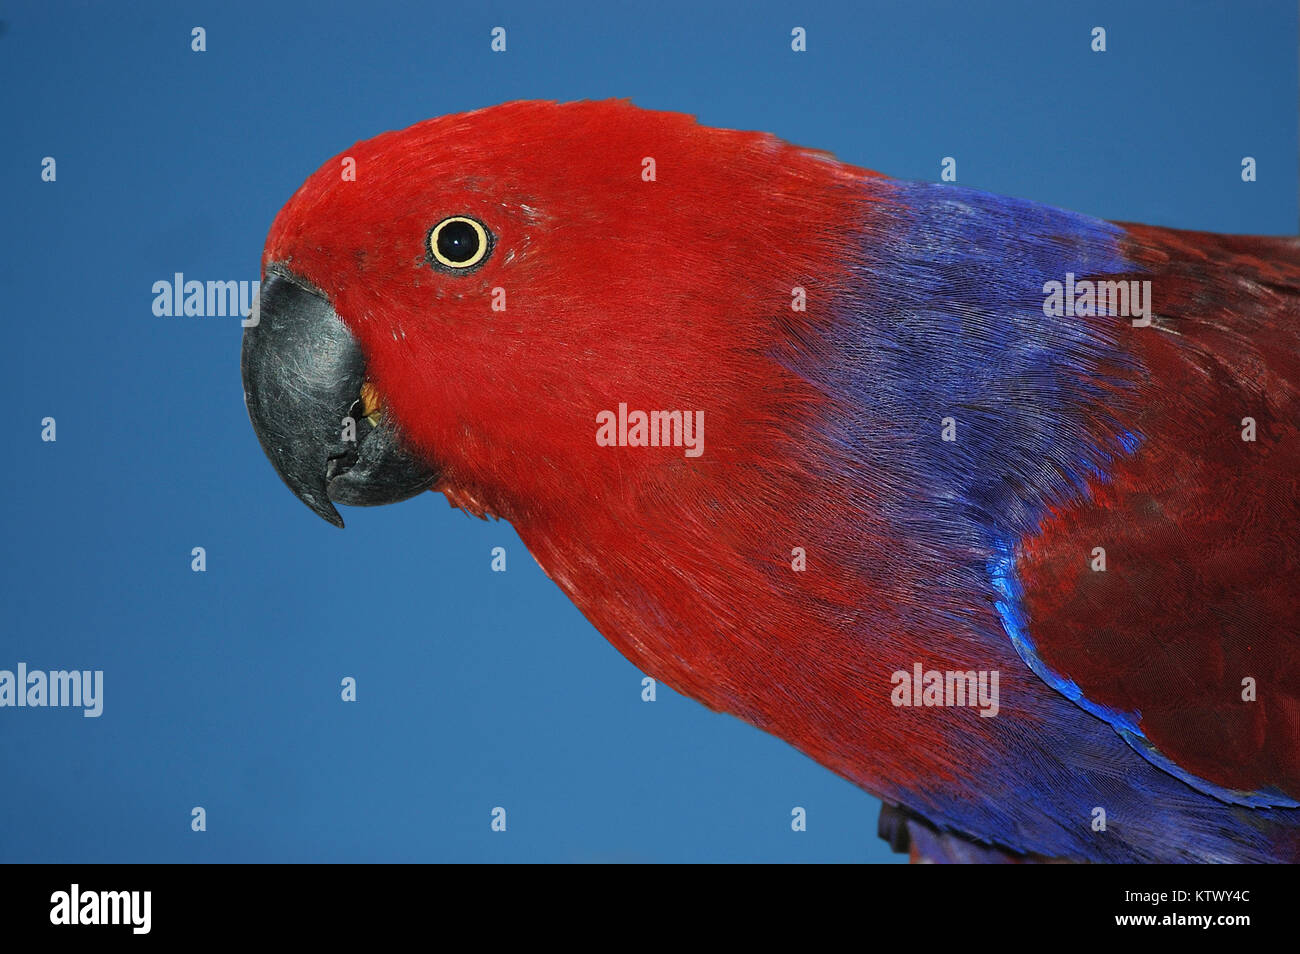 portrait of male Australian red-sided parrot, Eclectus roratus Stock Photo